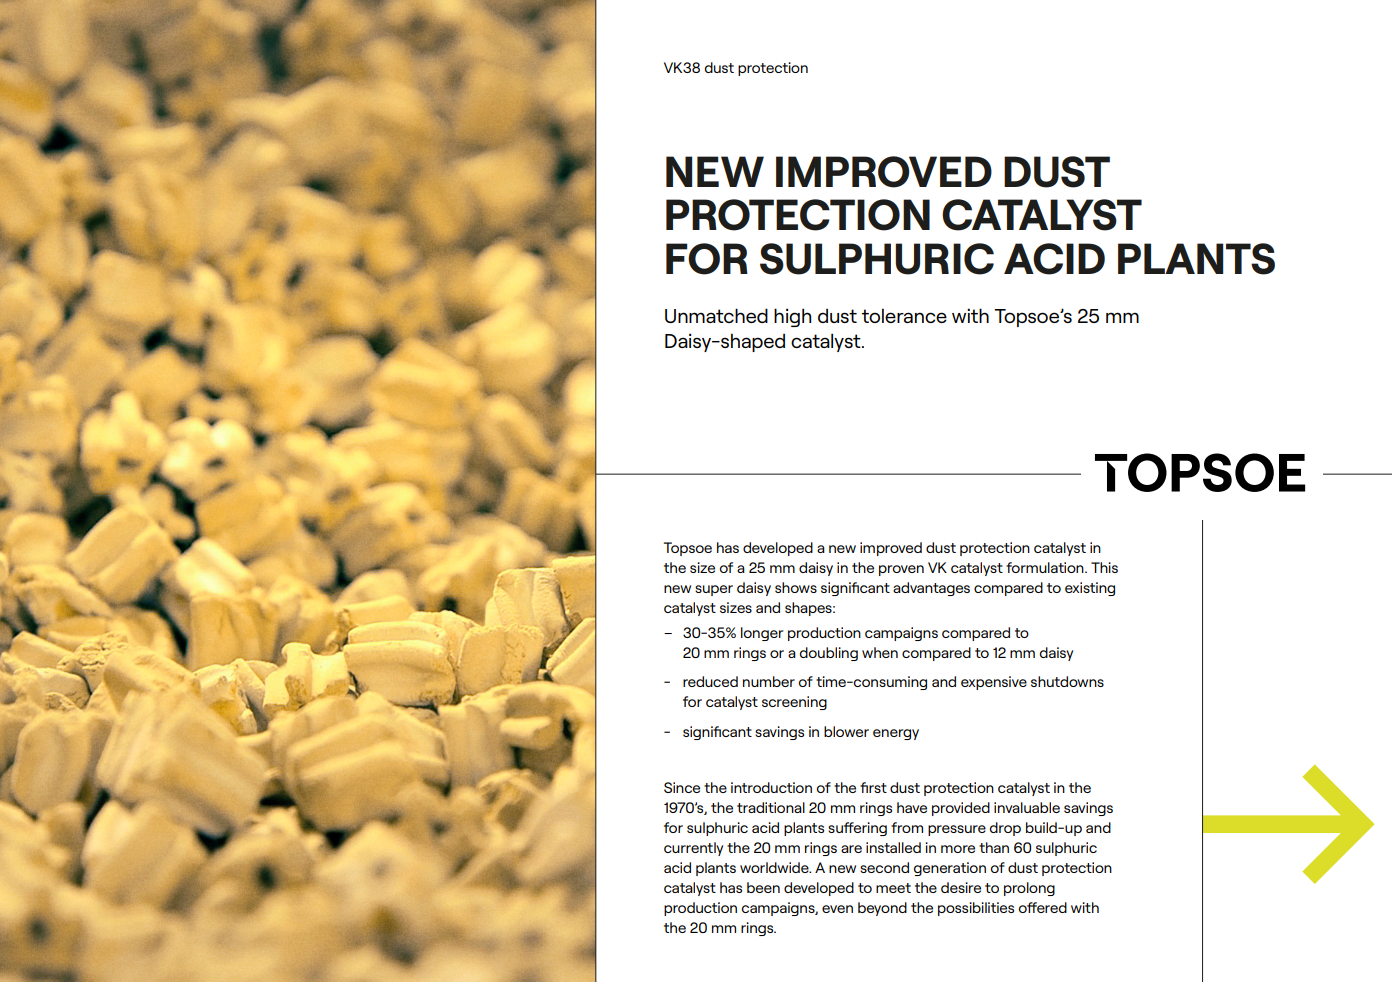 New improved dust protection catalyst for sulphuric acid plants